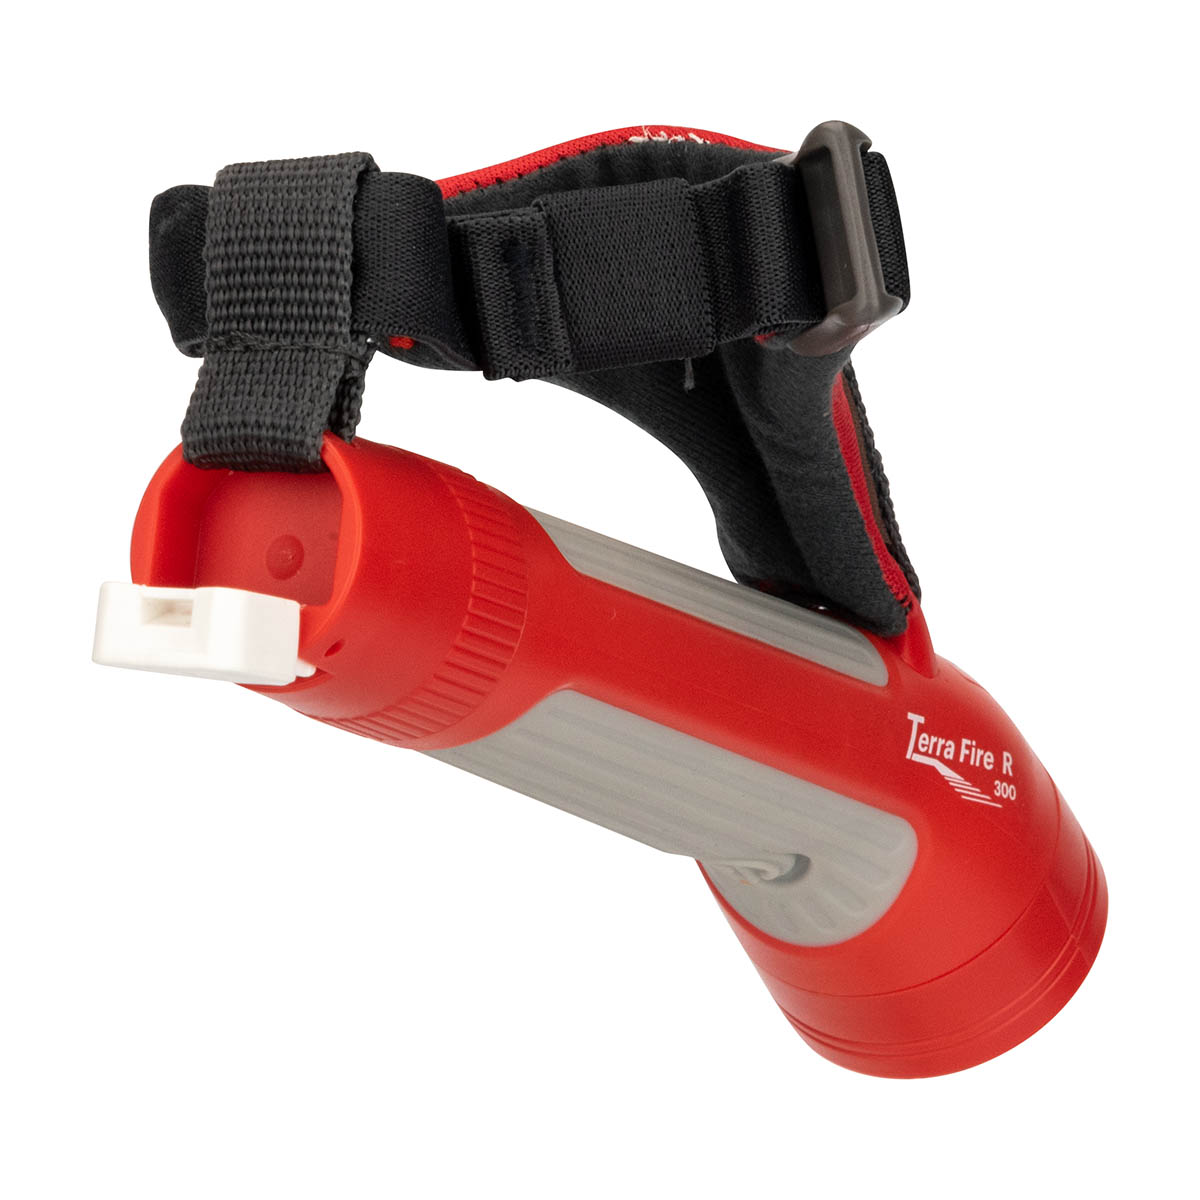 Nathan Terra Fire Hand Torch 300 R, , large image number null